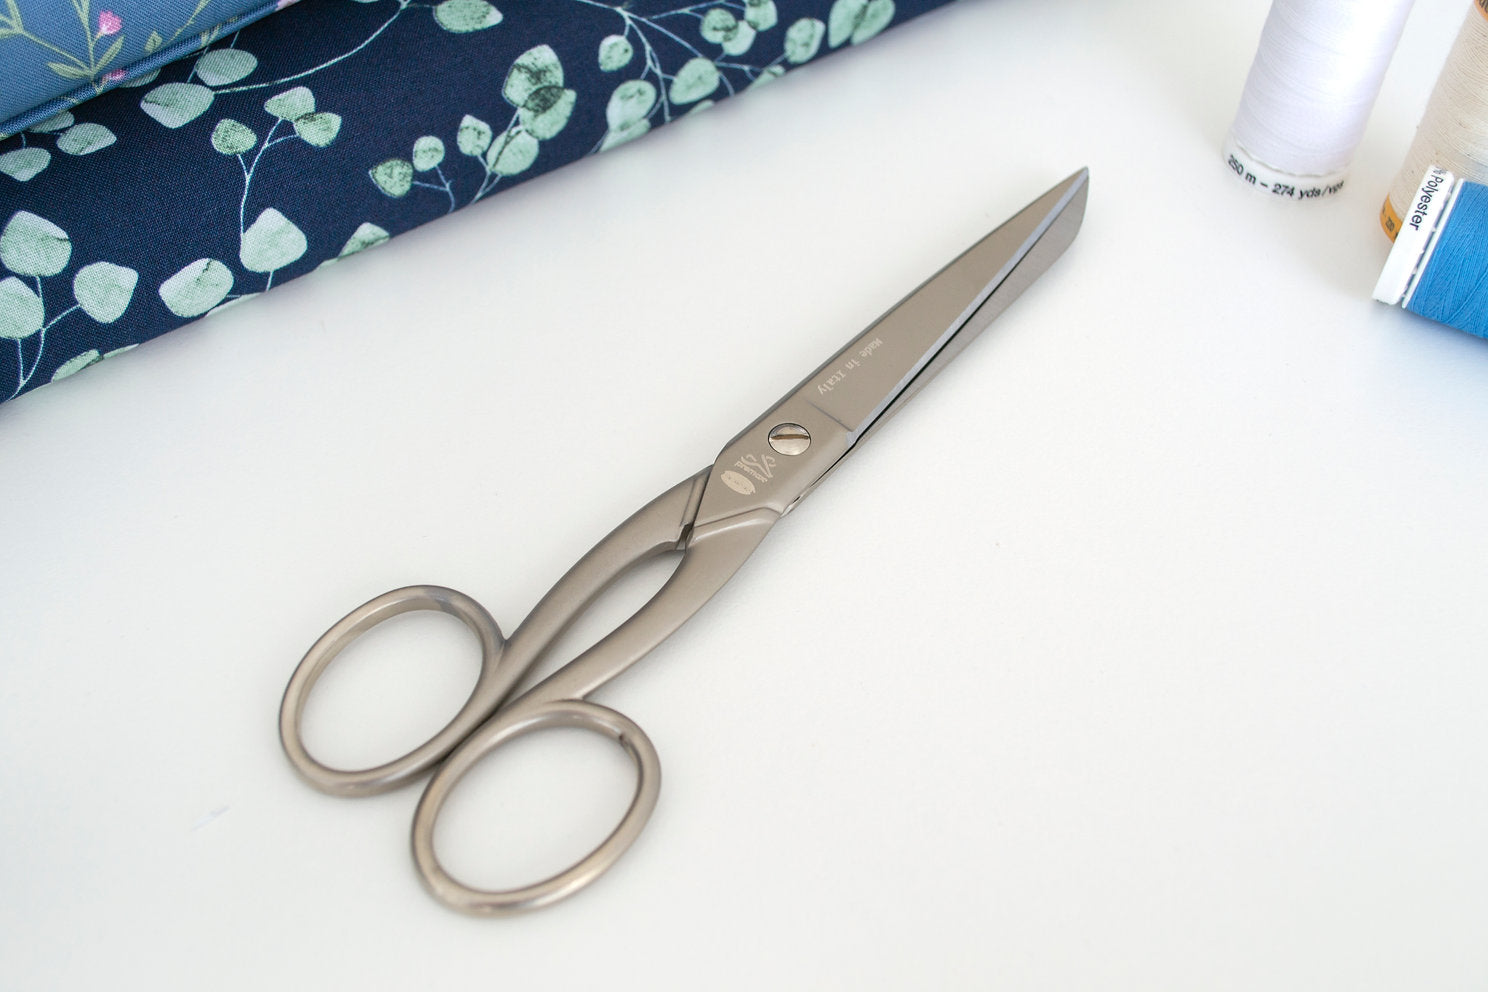 Premax Sewing Scissors 20 cm CROMA Collection 87098 | Italian Style and Precise Cutting Tools